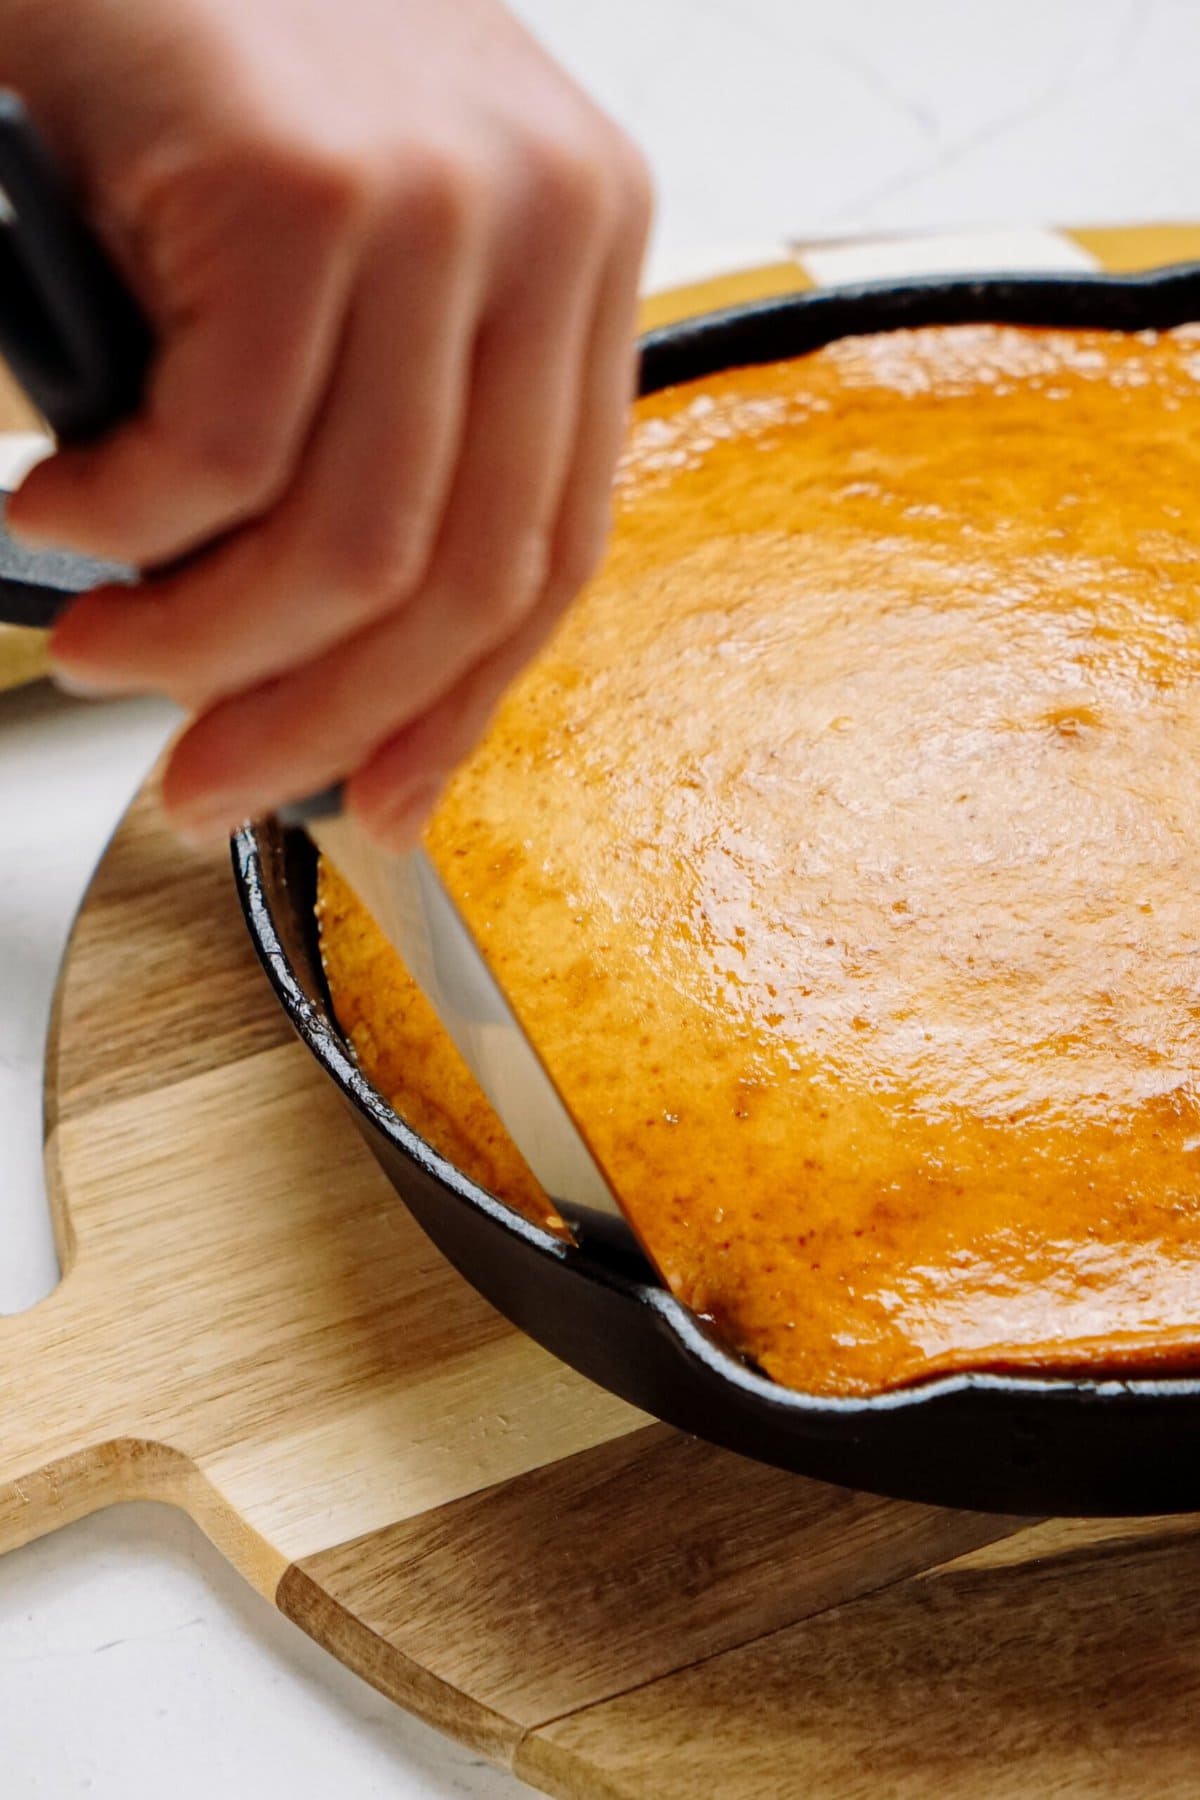 A person slicing a golden-brown upside down cake in a cast-iron skillet.